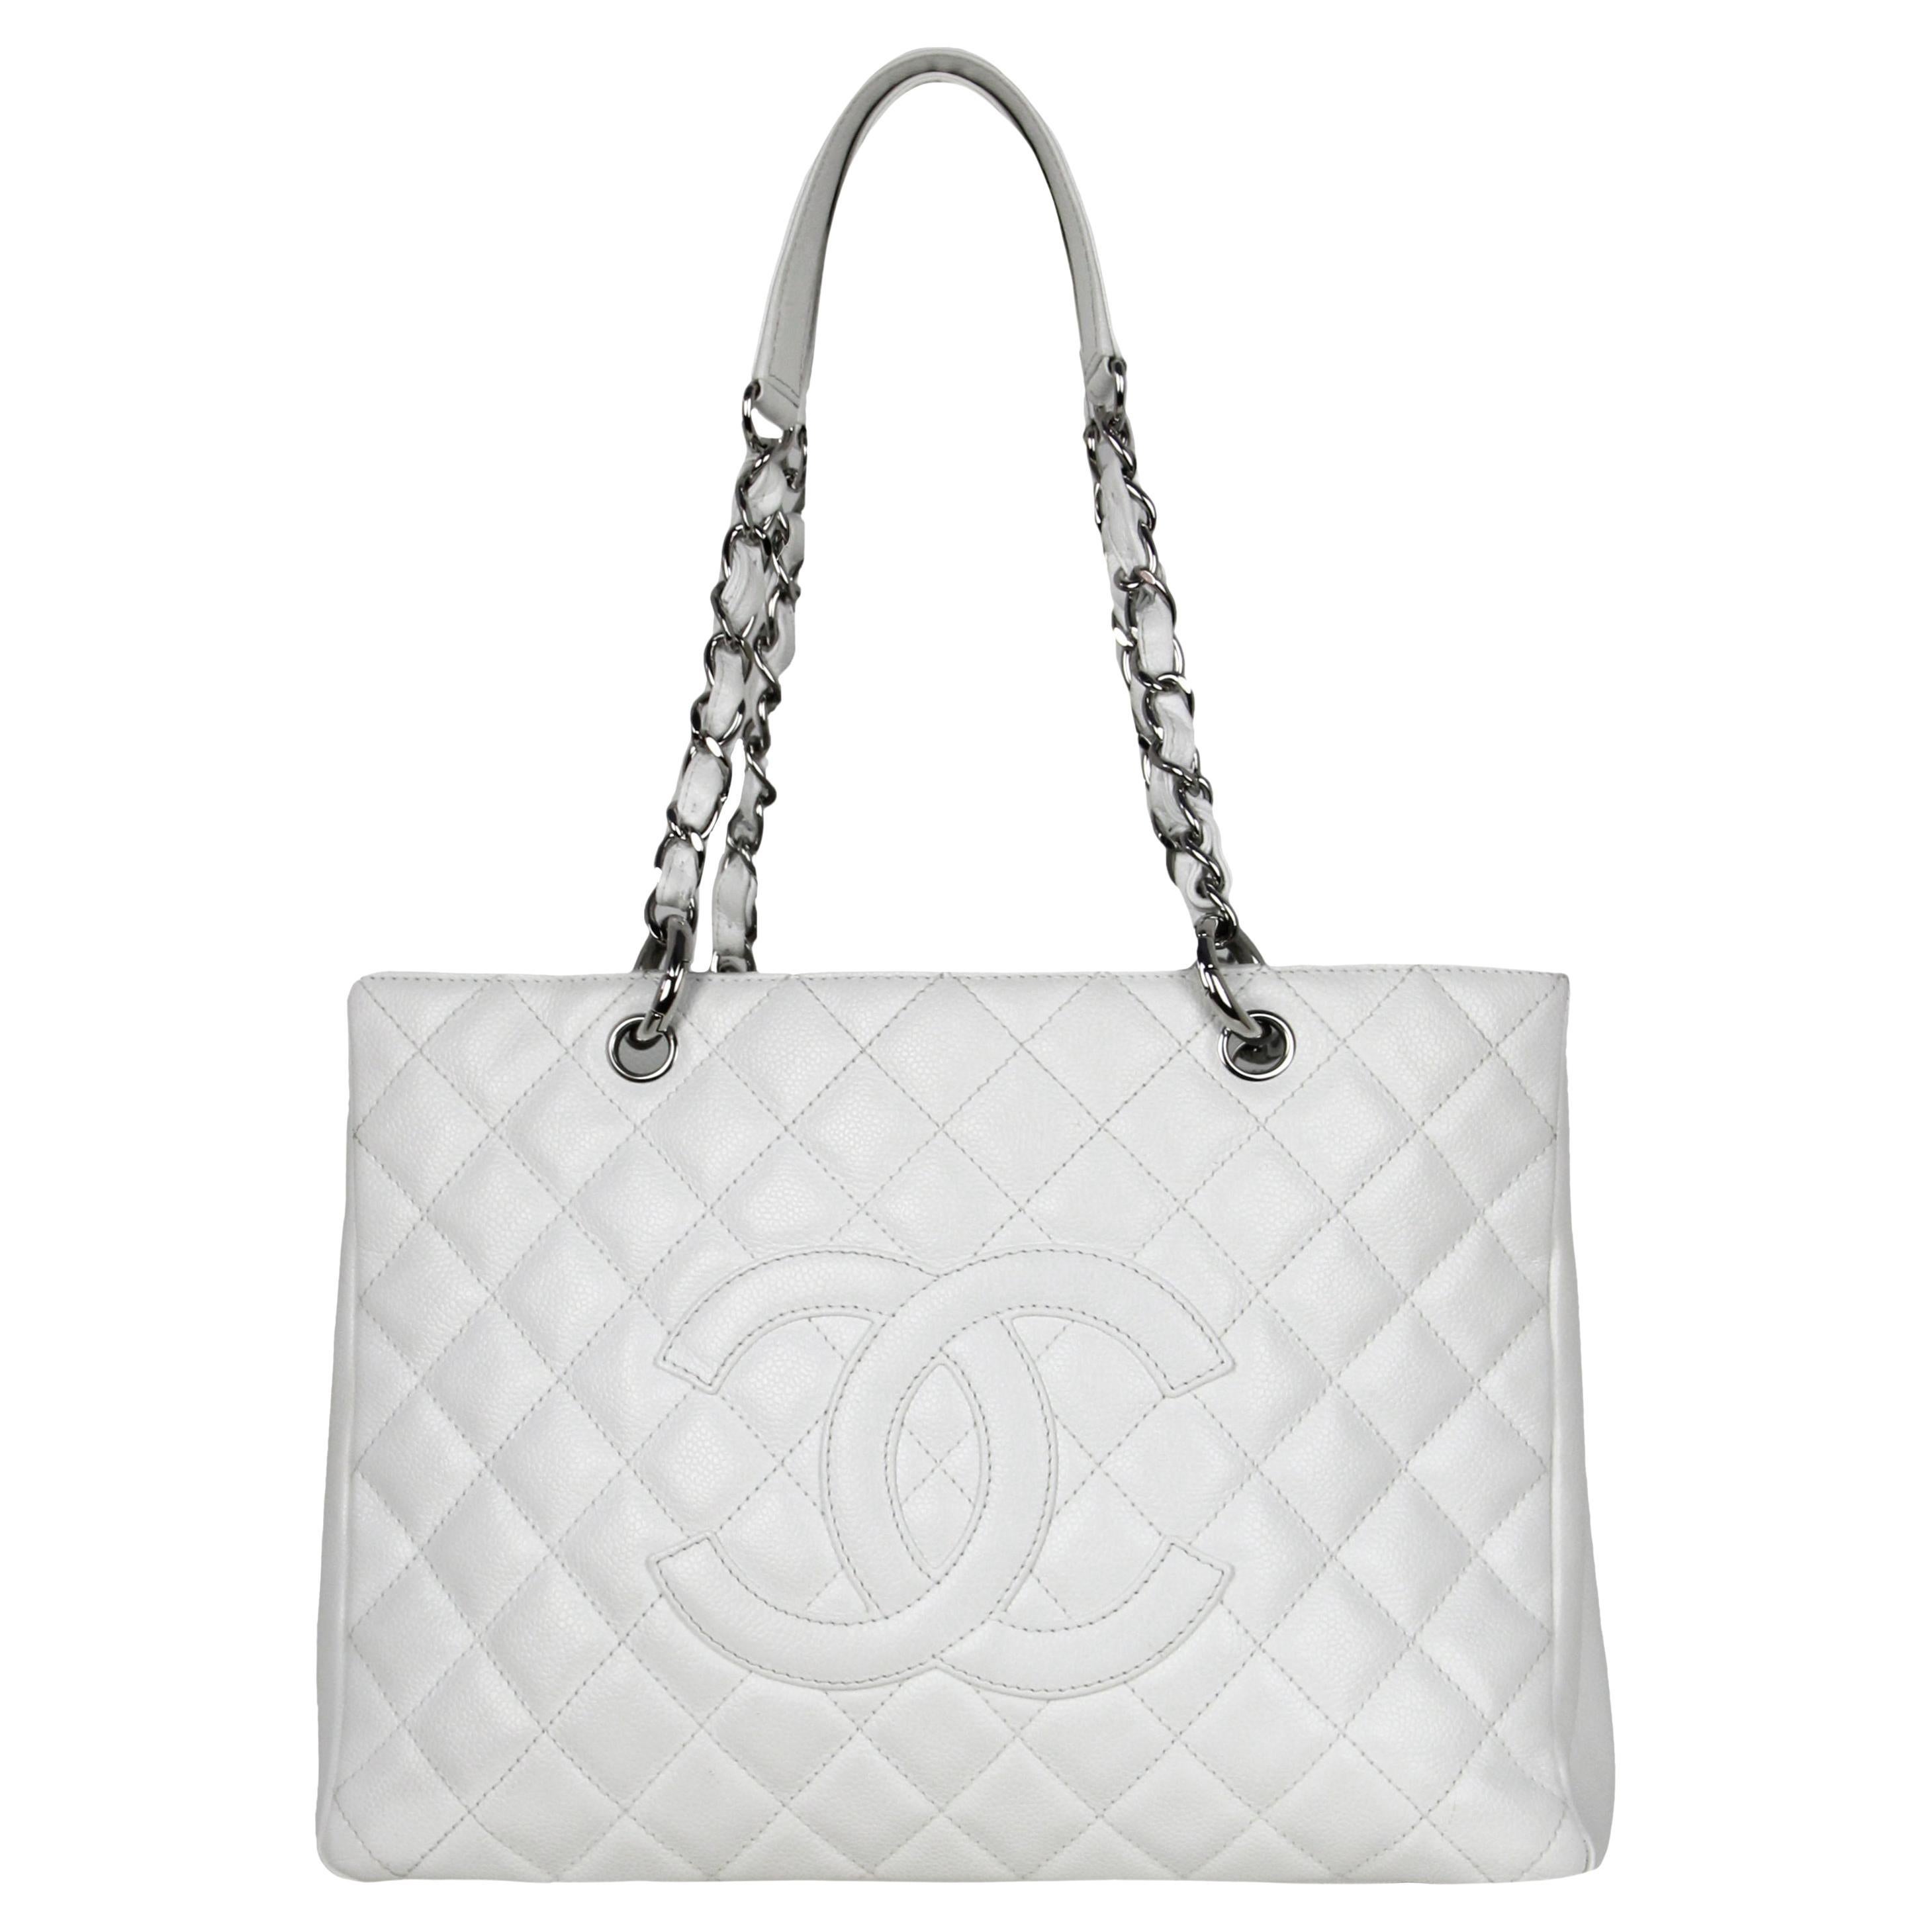 Chanel Quilted Caviar Leather Grand Shopper Tote